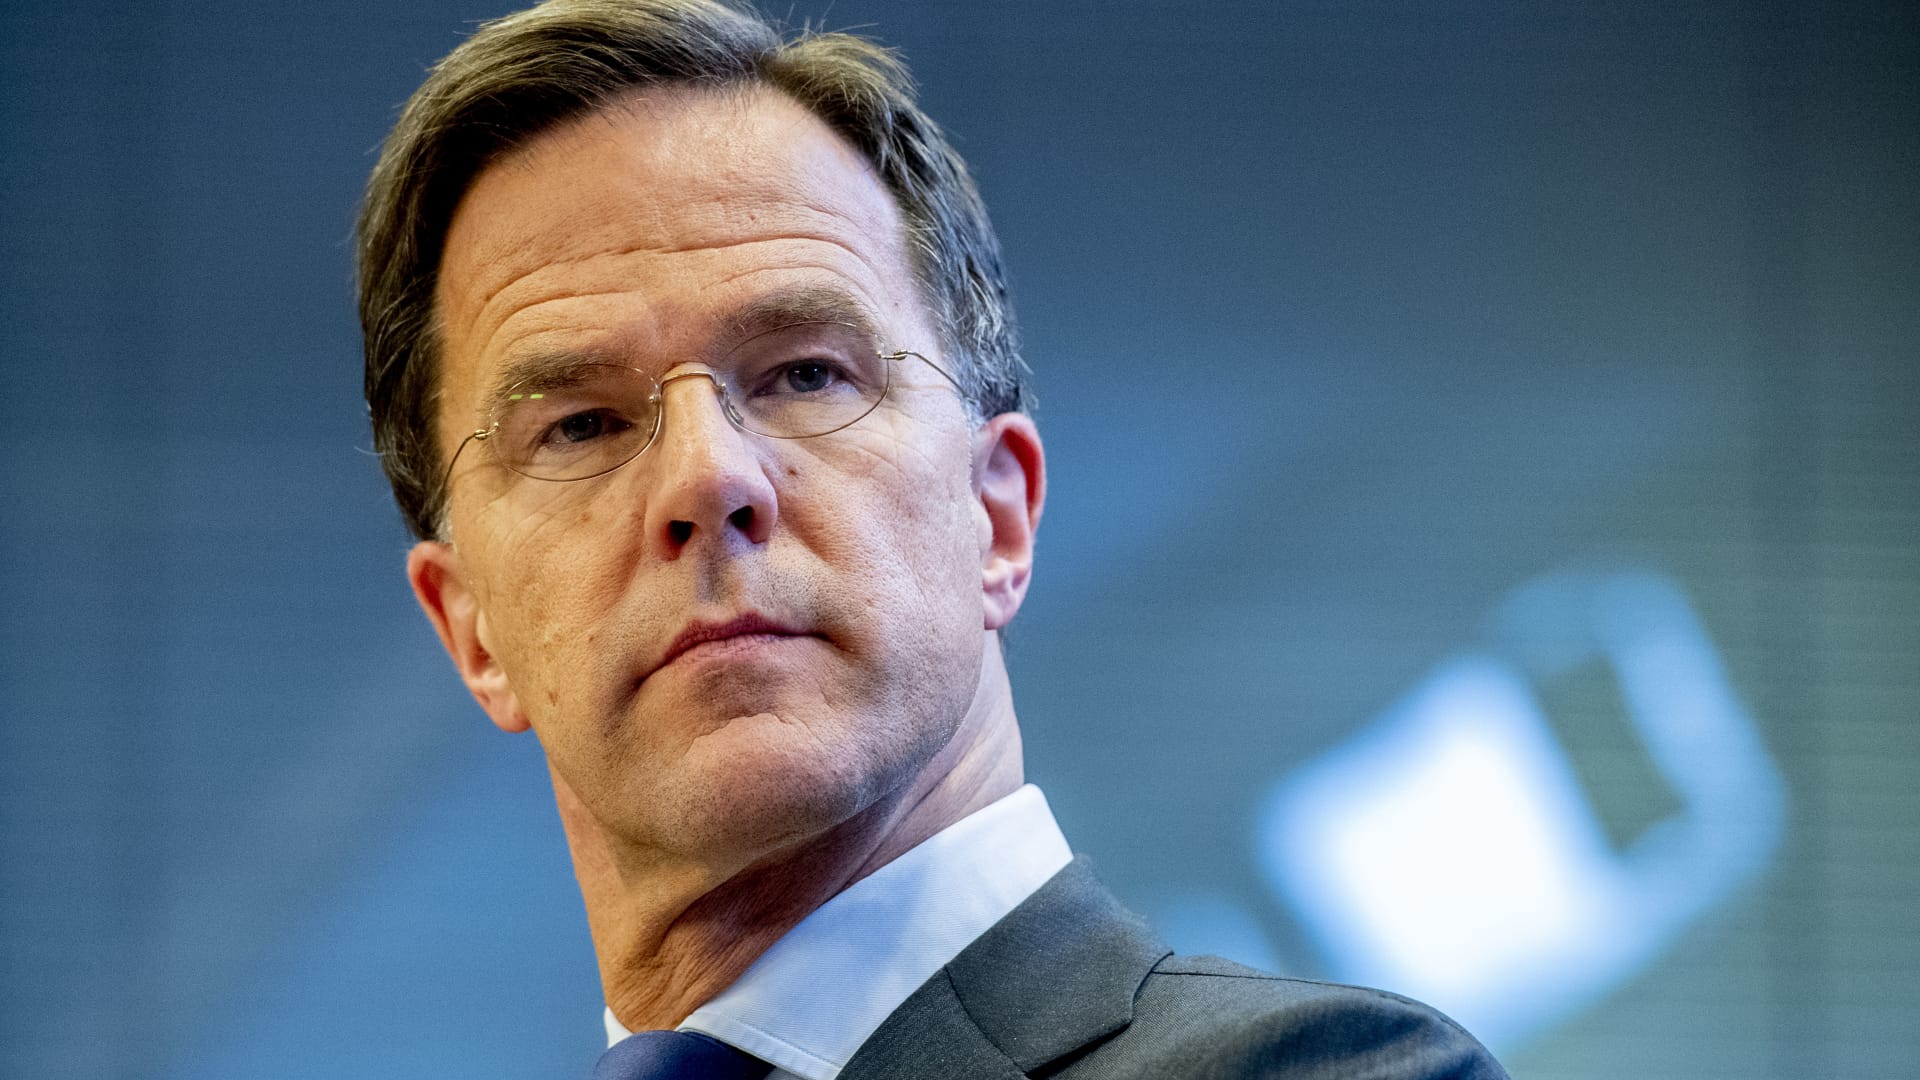 Dutch PM Mark Rutte says he won’t run for fifth term after government collapses